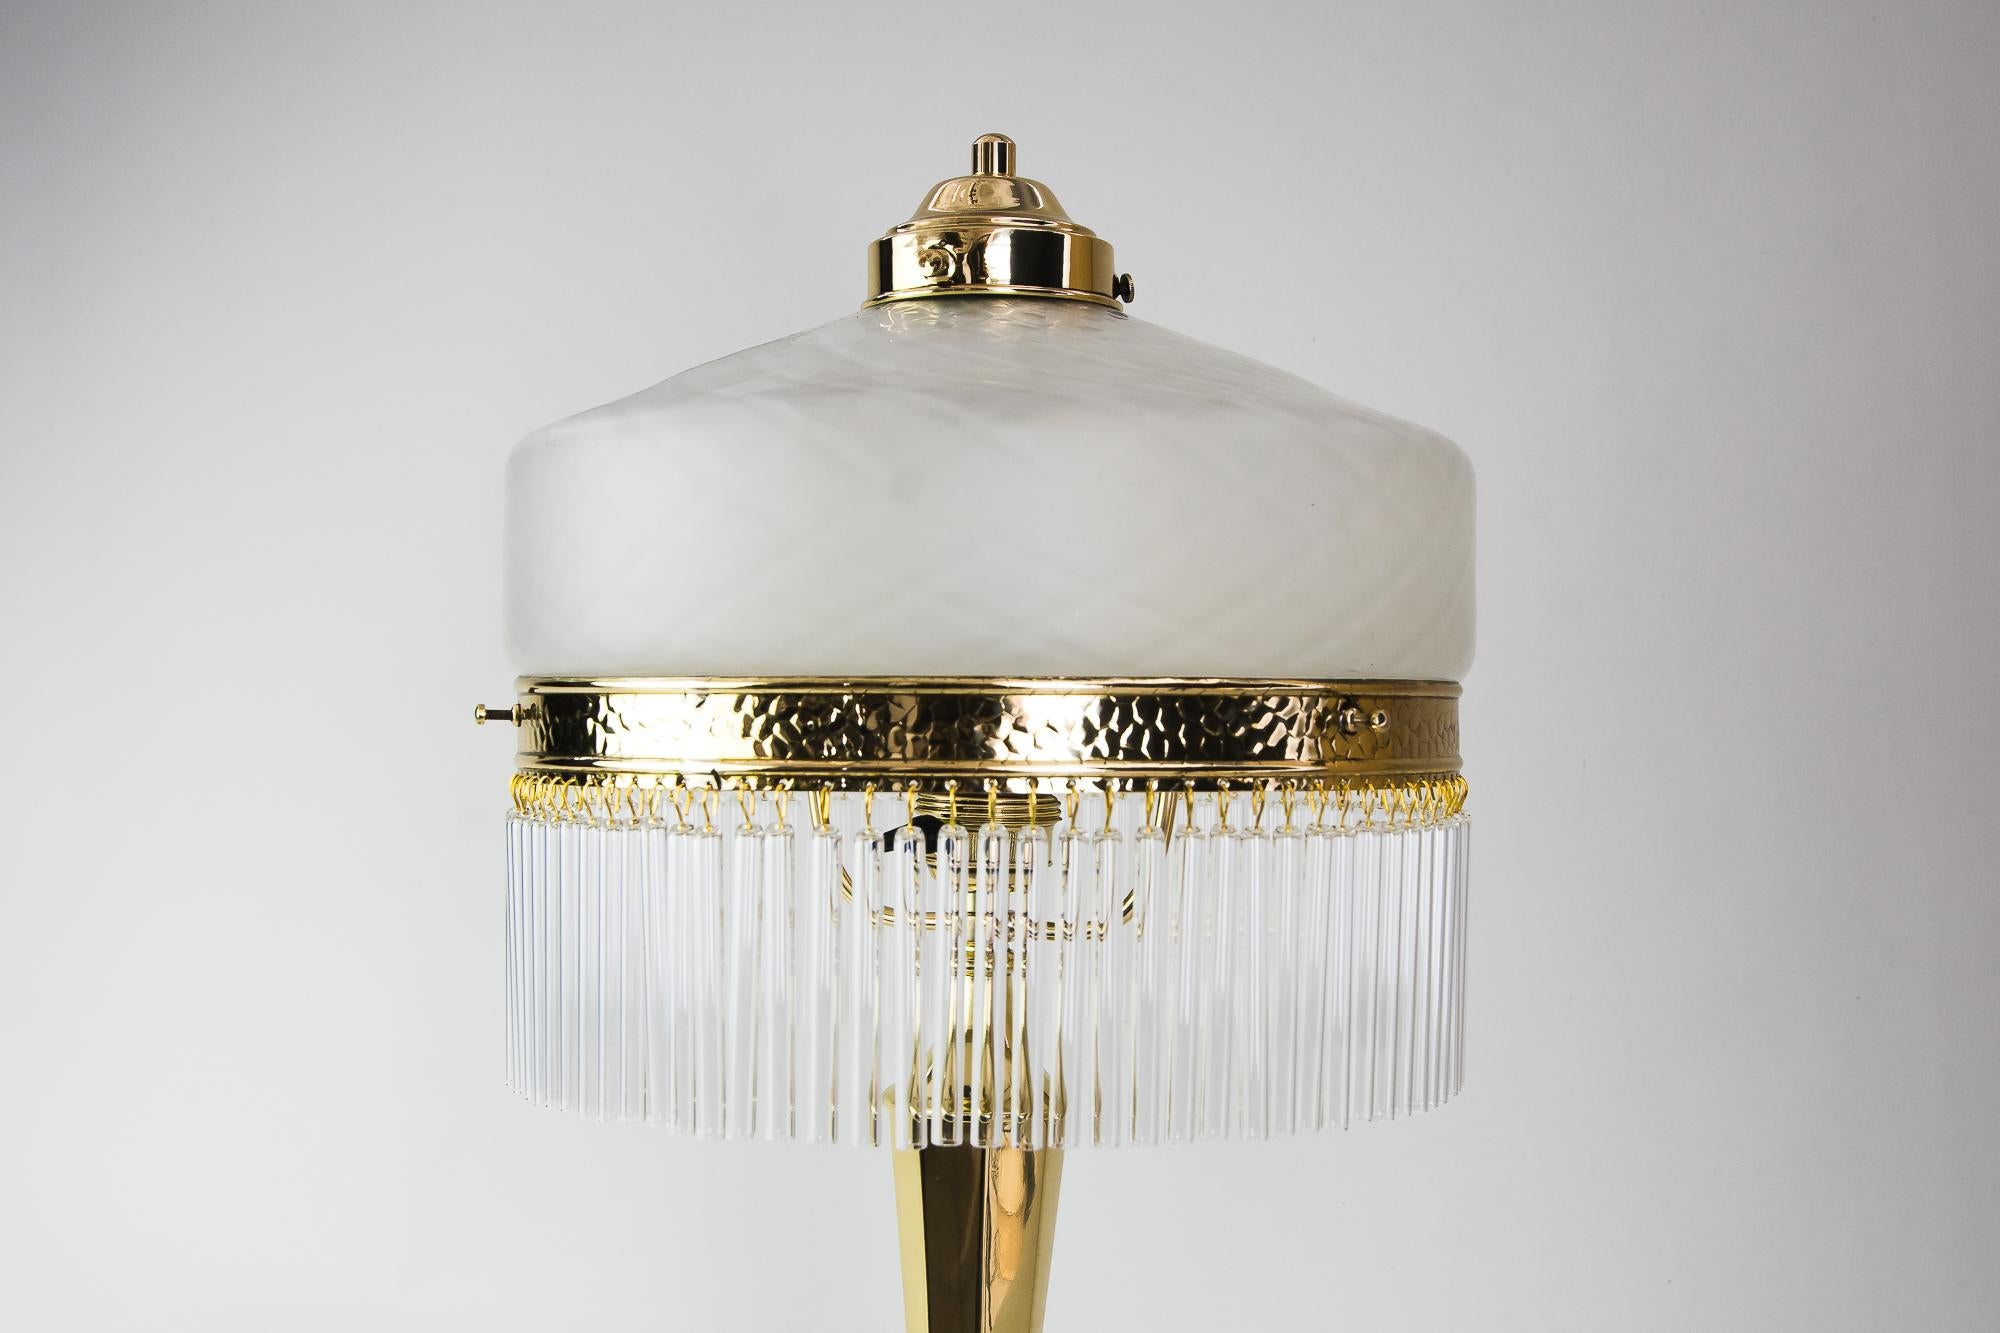 Art Deco table lamp, circa 1920s
Polished and stove enameled
Original opal glass shade
Glass sticks are replaced (new).